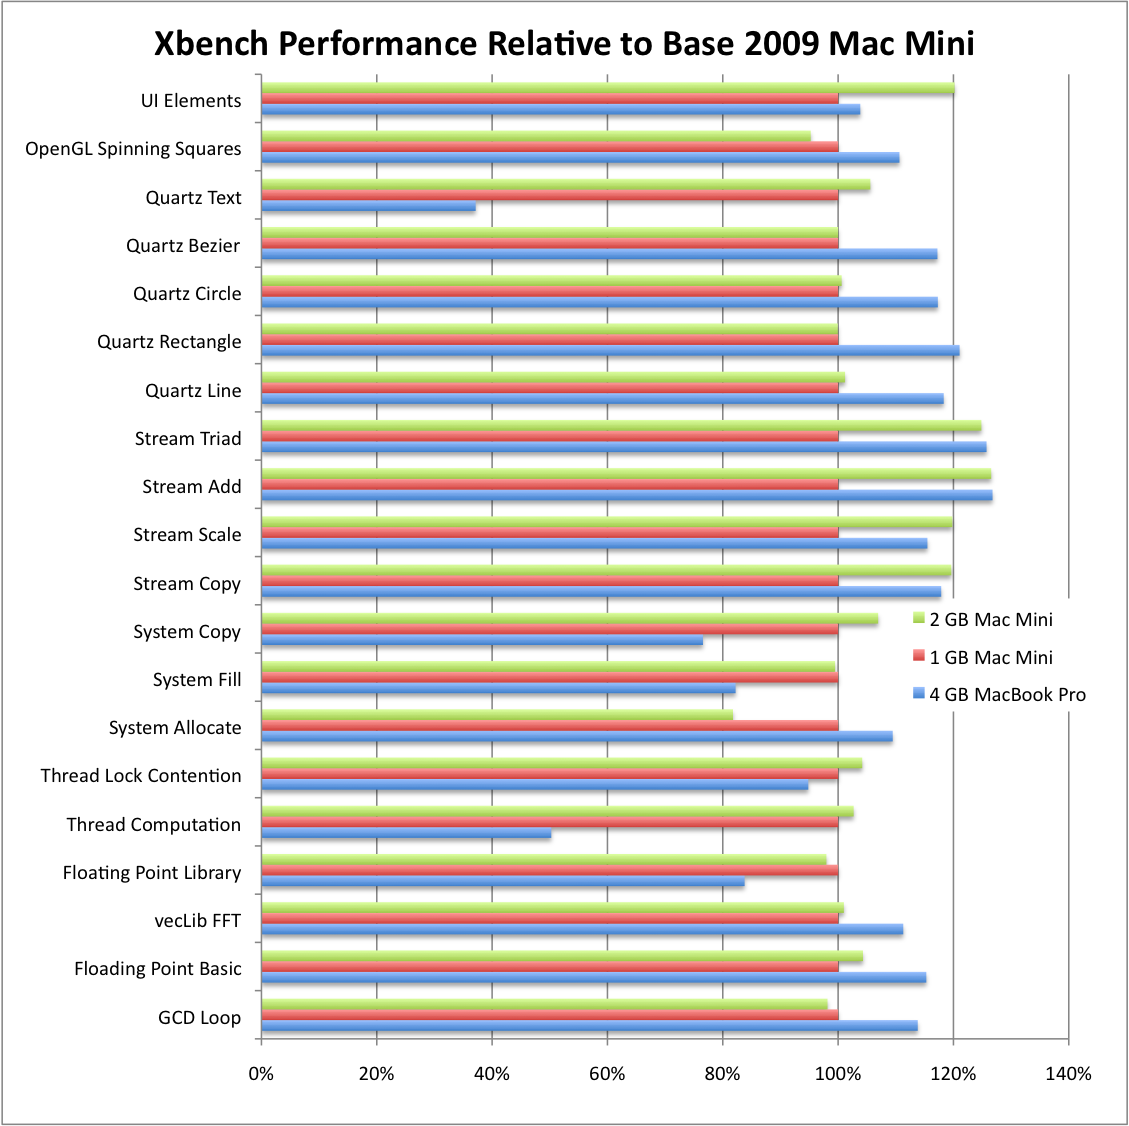 The new Mac Mini performs well in CPU and RAM tests, but 1 GB is insufficient and upgrading to 2 GB gives a noticeable boost